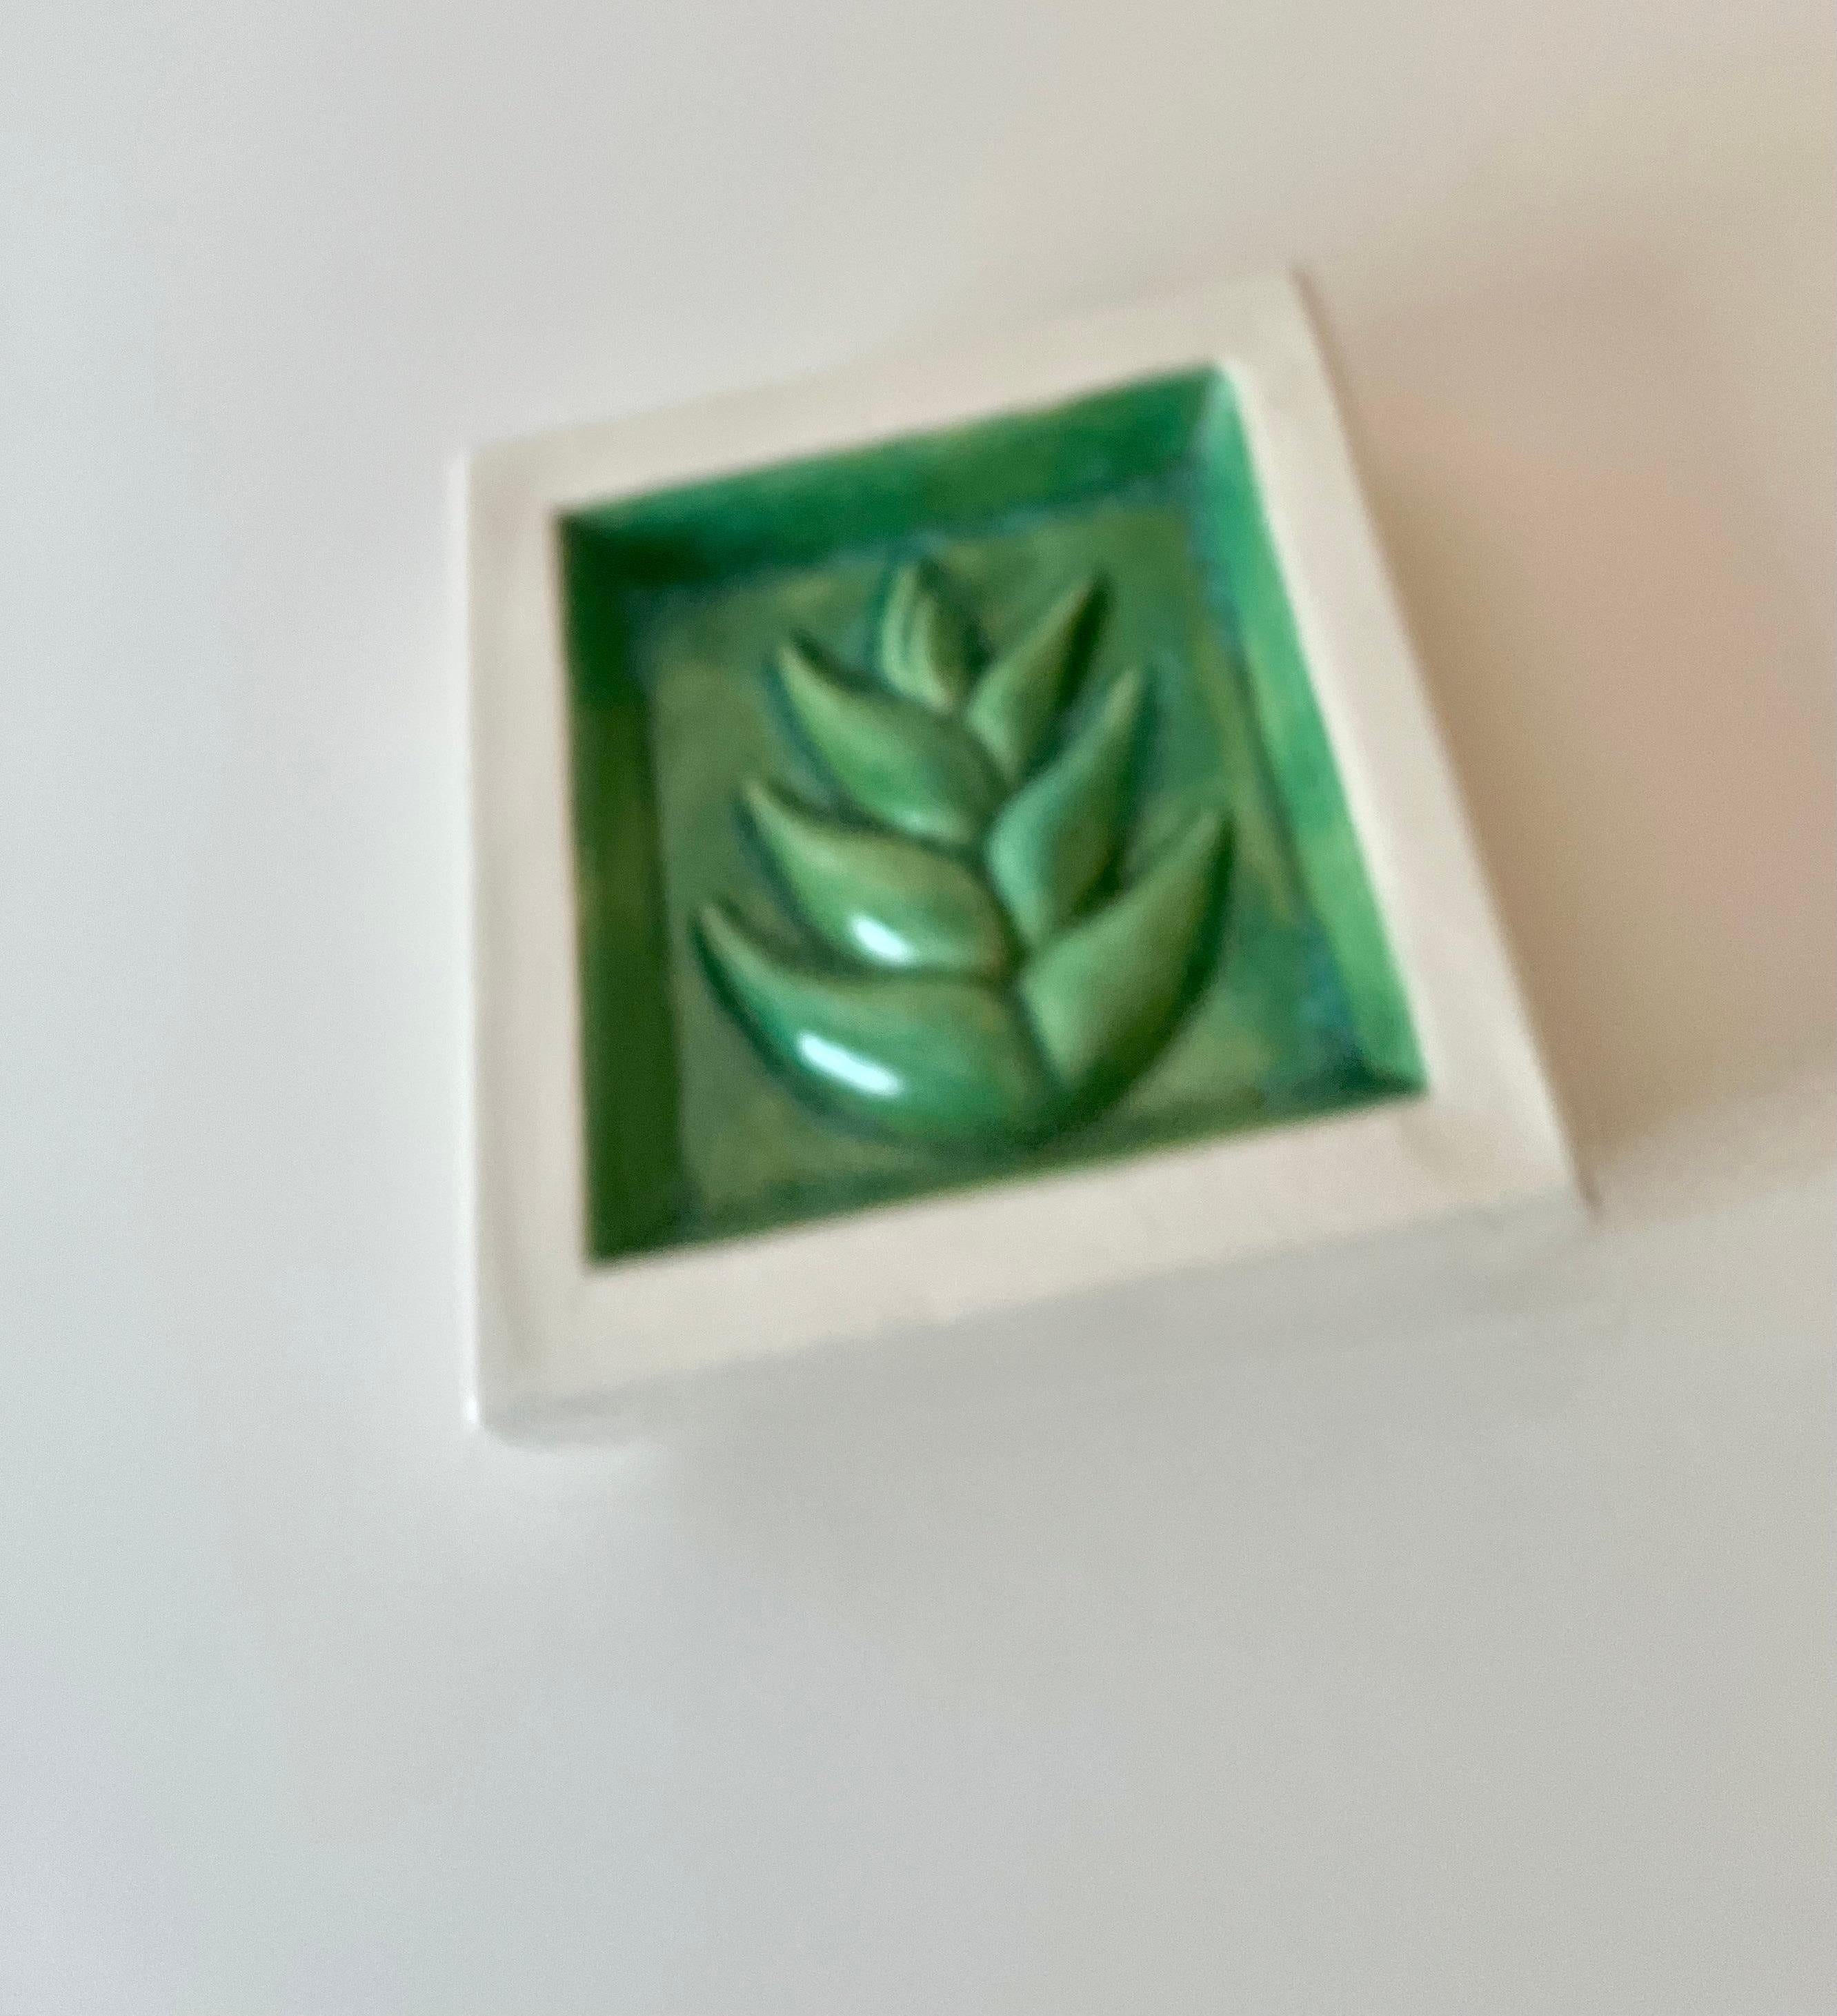 Hand-Painted Terracotta Tile Bowl with Green Leaf